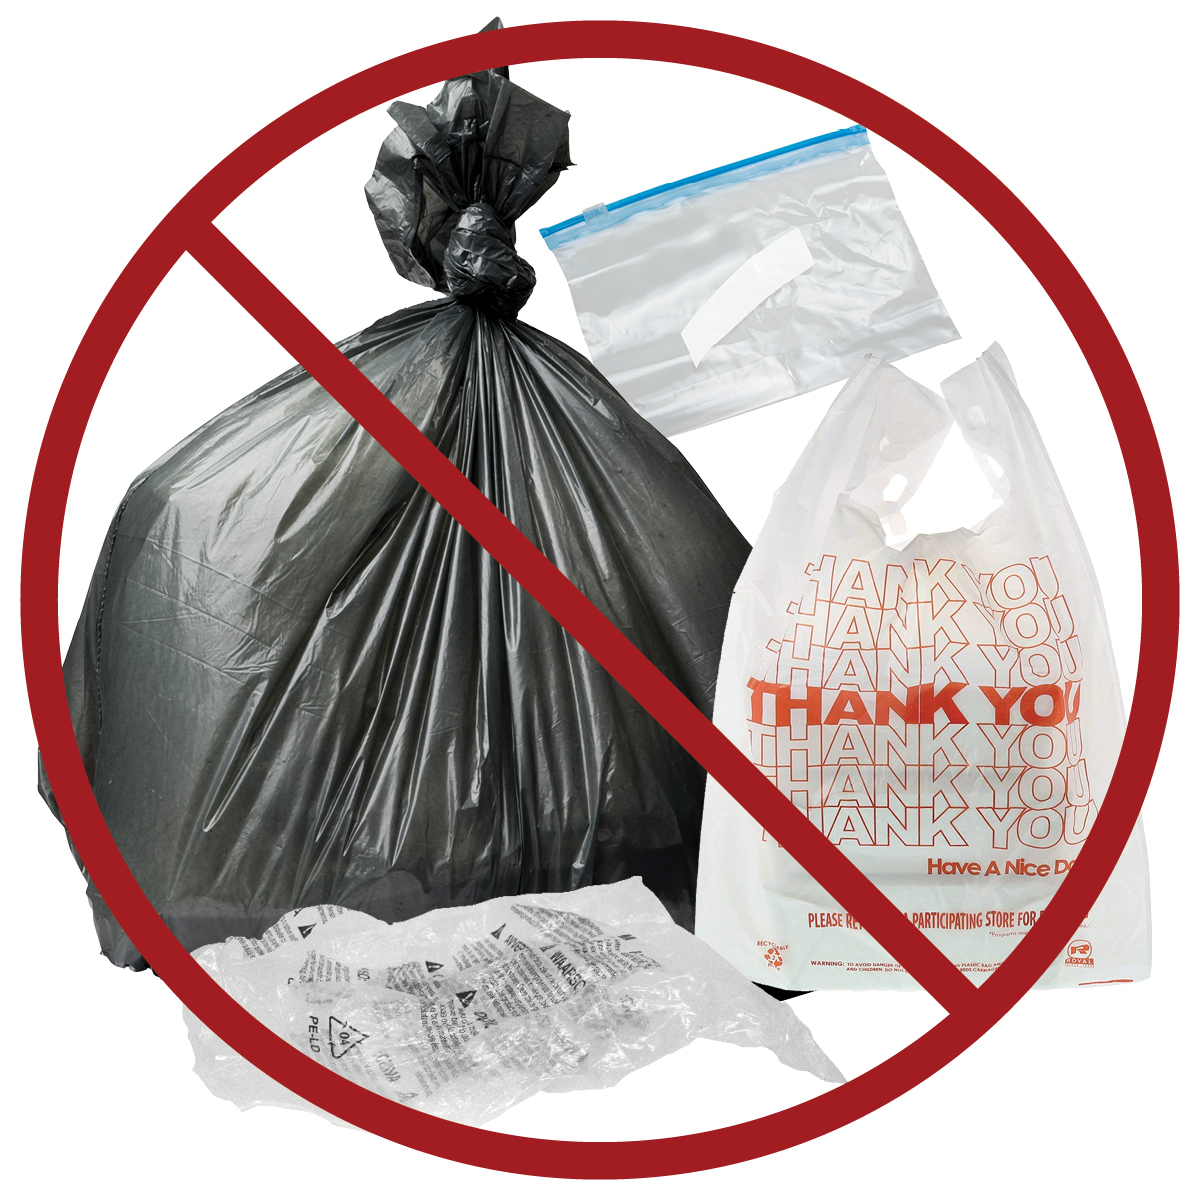 Plastic bags and film: keep out of blue cart